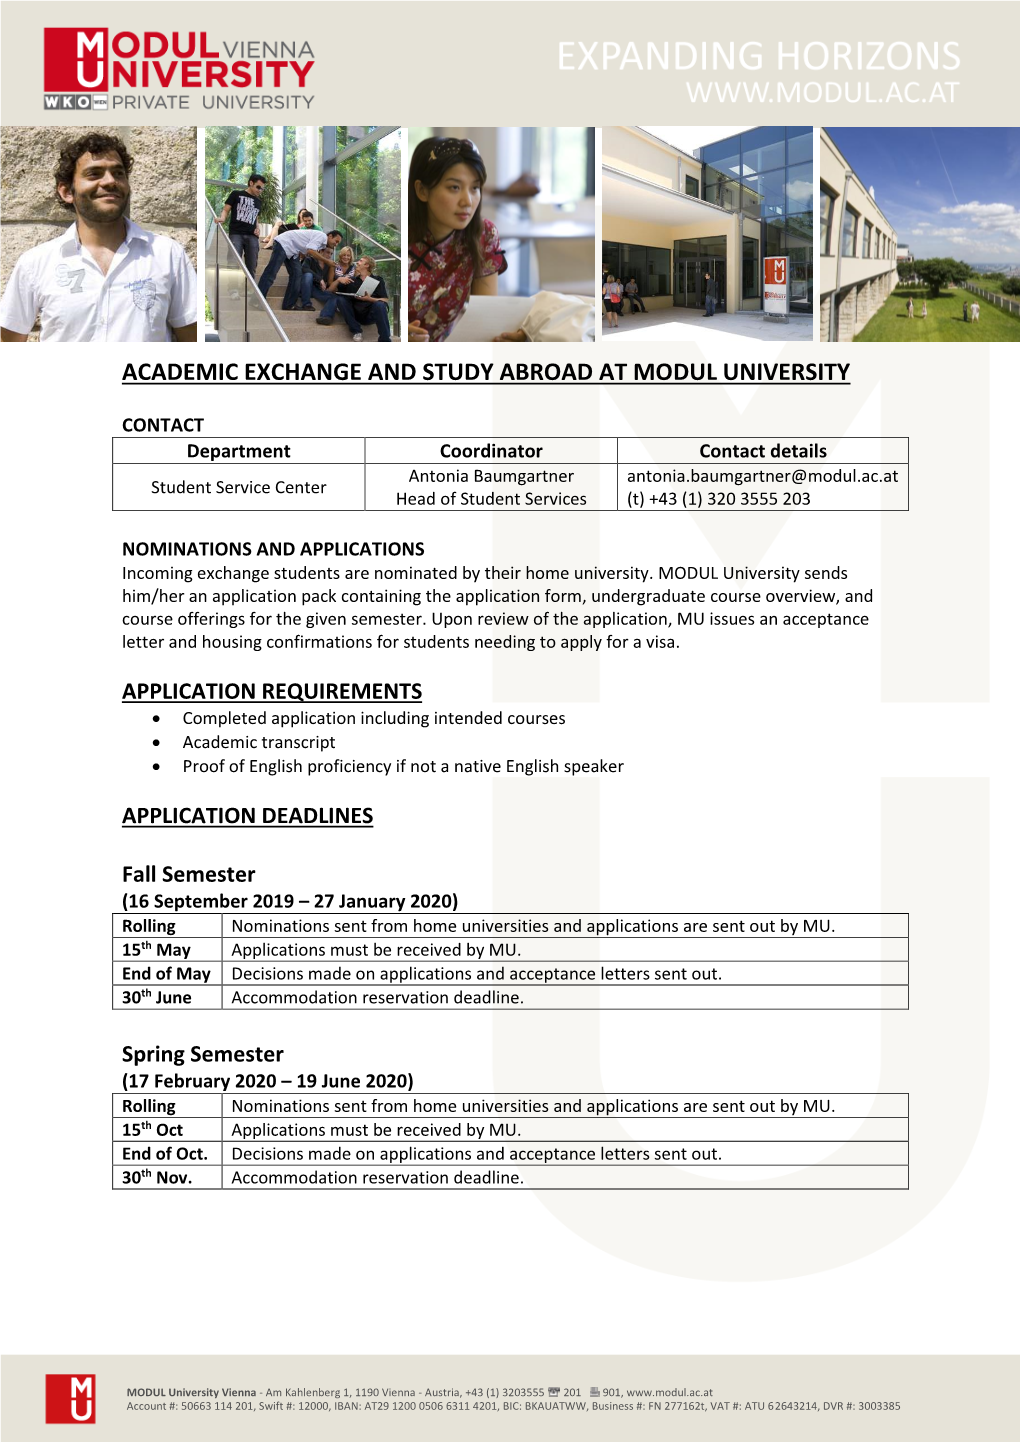 Academic Exchange and Study Abroad at Modul University